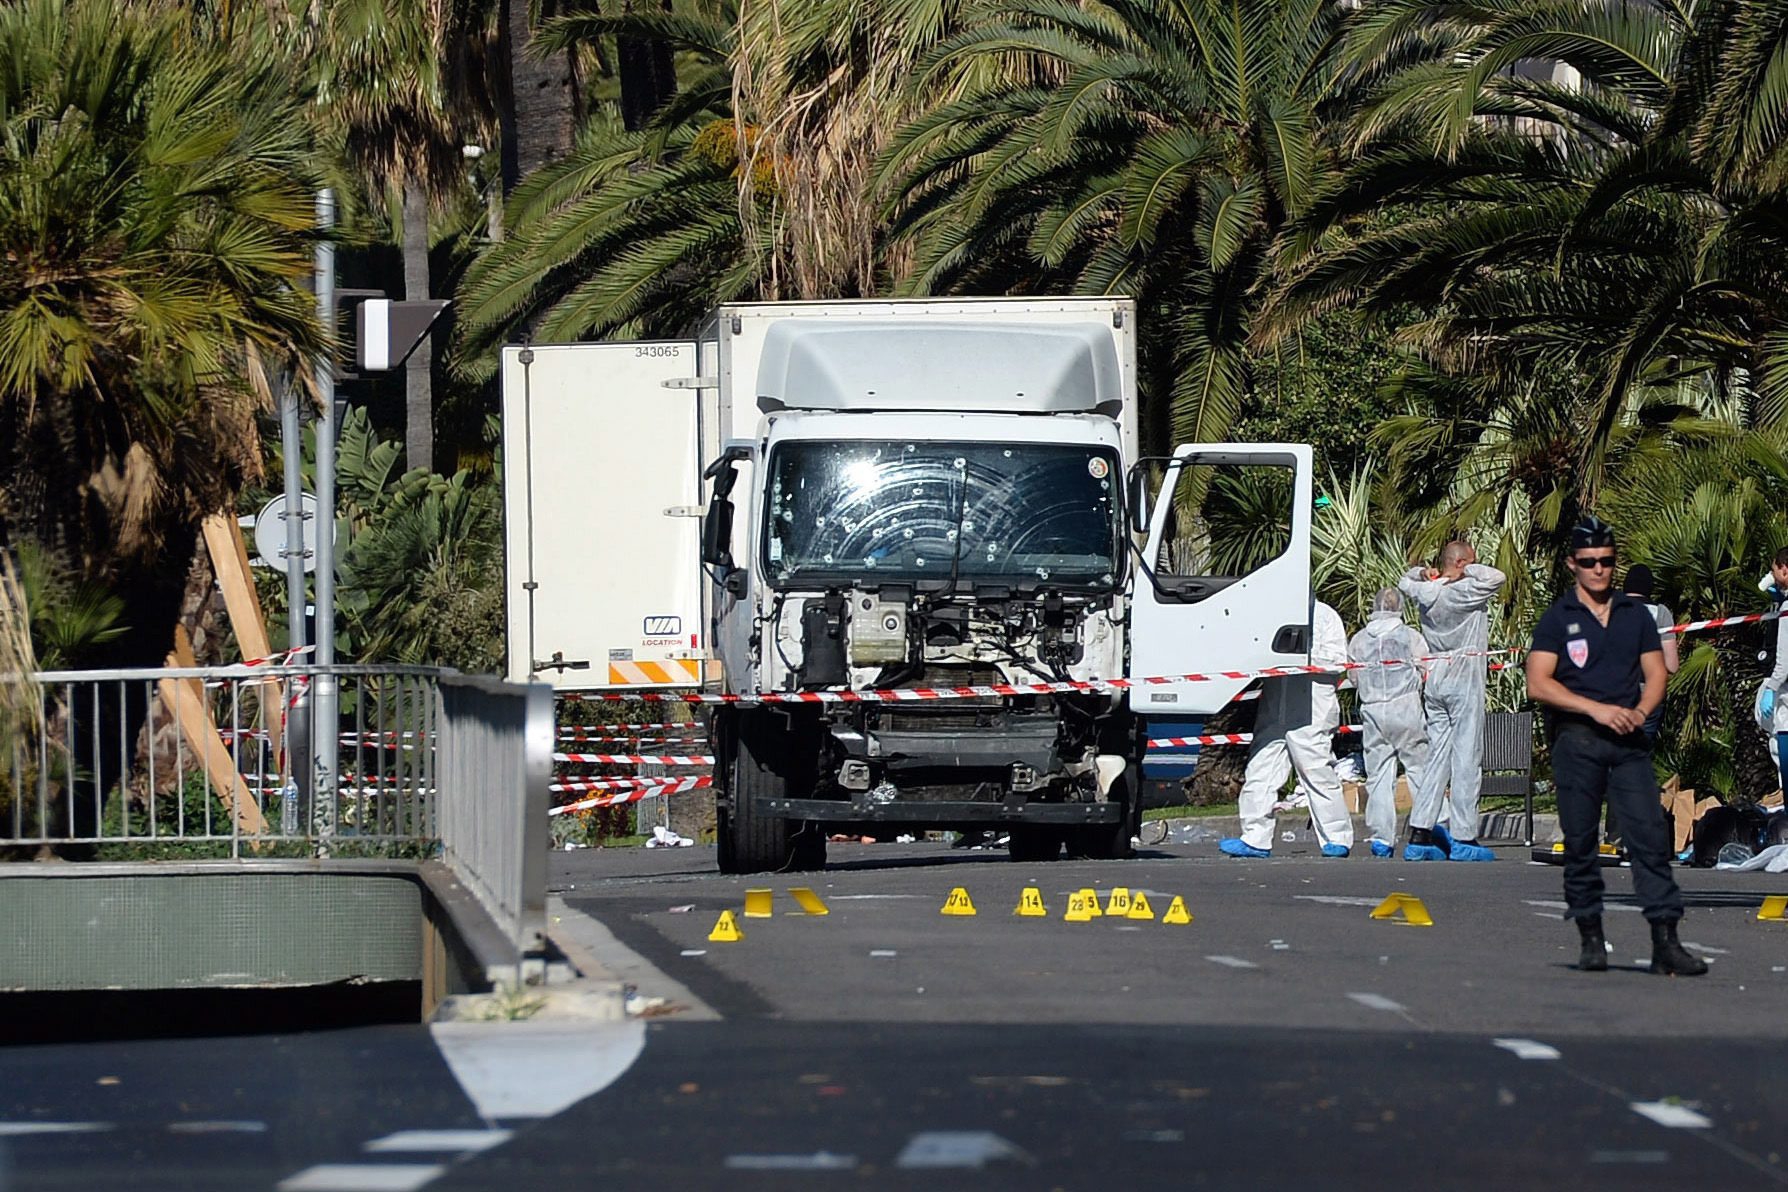 epa05426298 Police secure the area where a truck drove into a crowd during Bastille Day celebrations in Nice, France, 15 July 2016. According to reports, at least 84 people died and many were injured after a truck drove into the crowd on the famous Promenade des Anglais during celebrations of Bastille Day in Nice, late 14 July. Anti-terrorism police took over the investigation in the incident, media added.  EPA/ANDREAS GEBERT FRANCE NICE TRUCK ATTACK